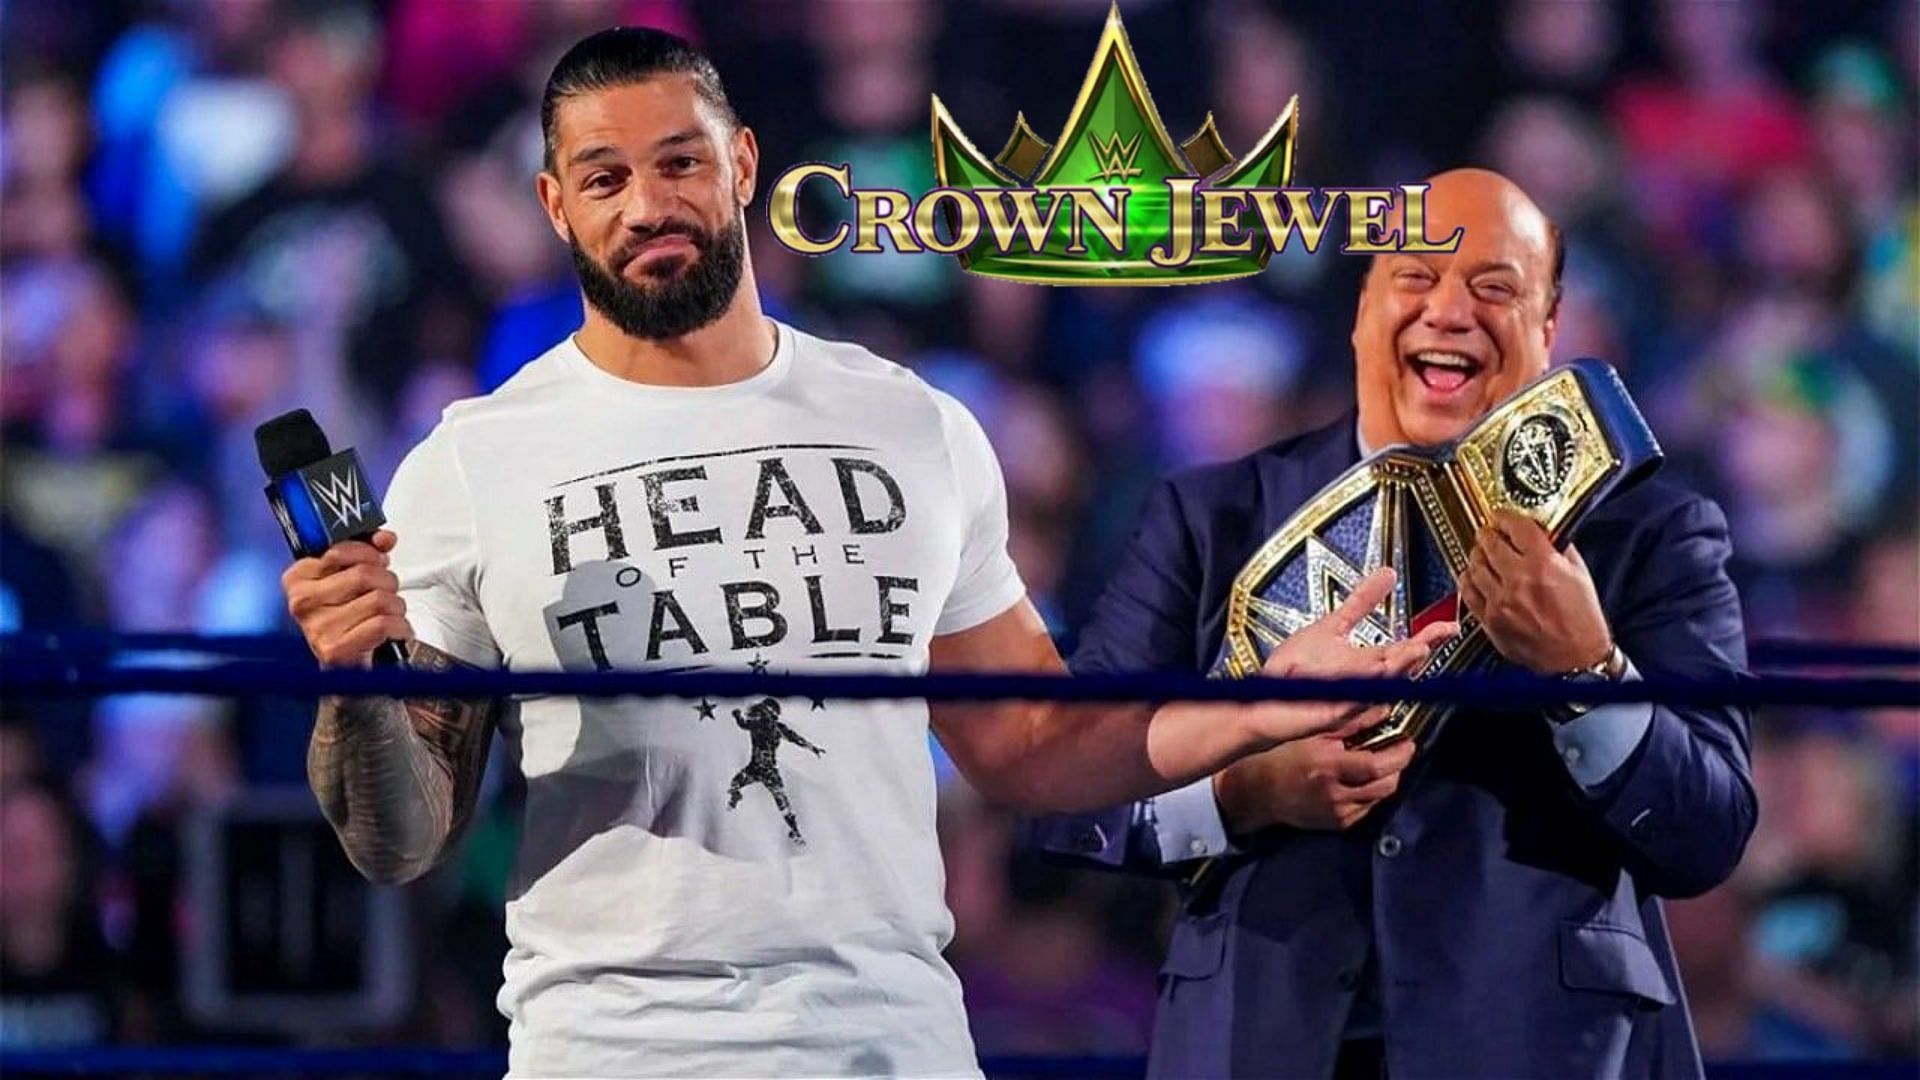 Roman Reigns will be in action at WWE Crown Jewel!